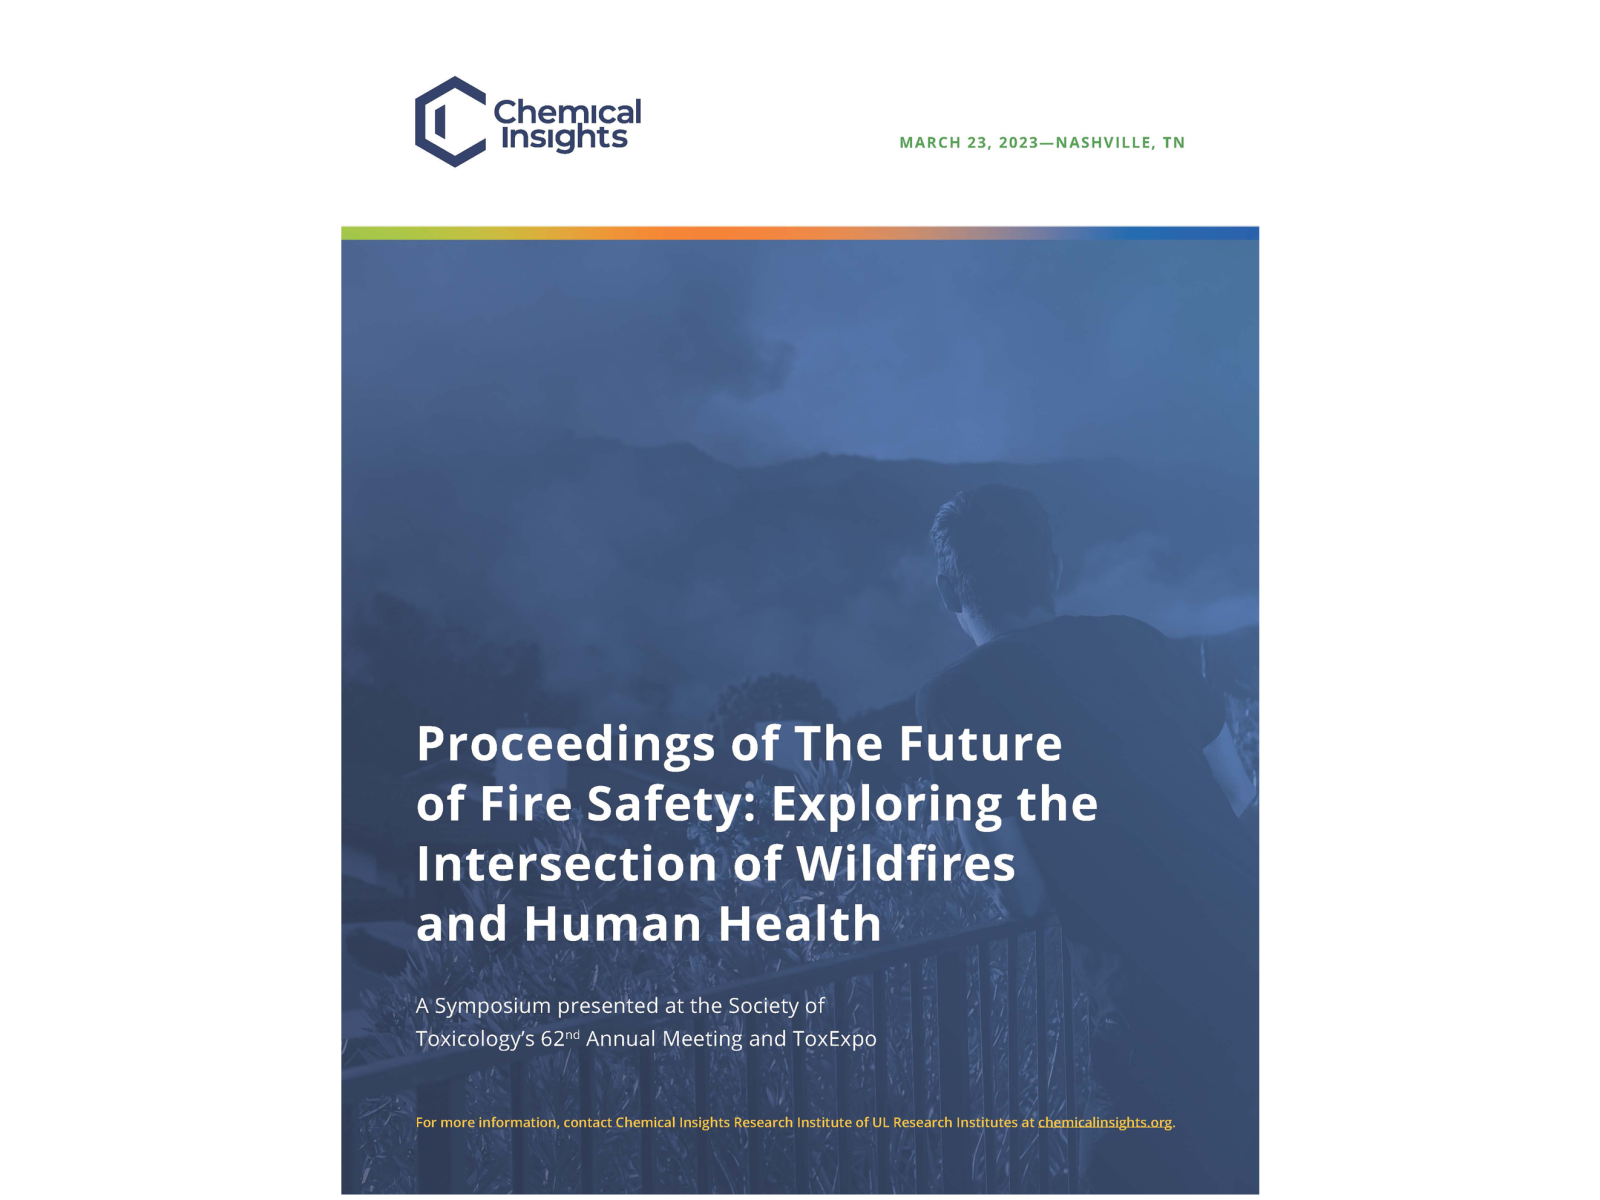 Proceedings of The Future of Fire Safety: Exploring the Intersection of Wildfires and Human Health